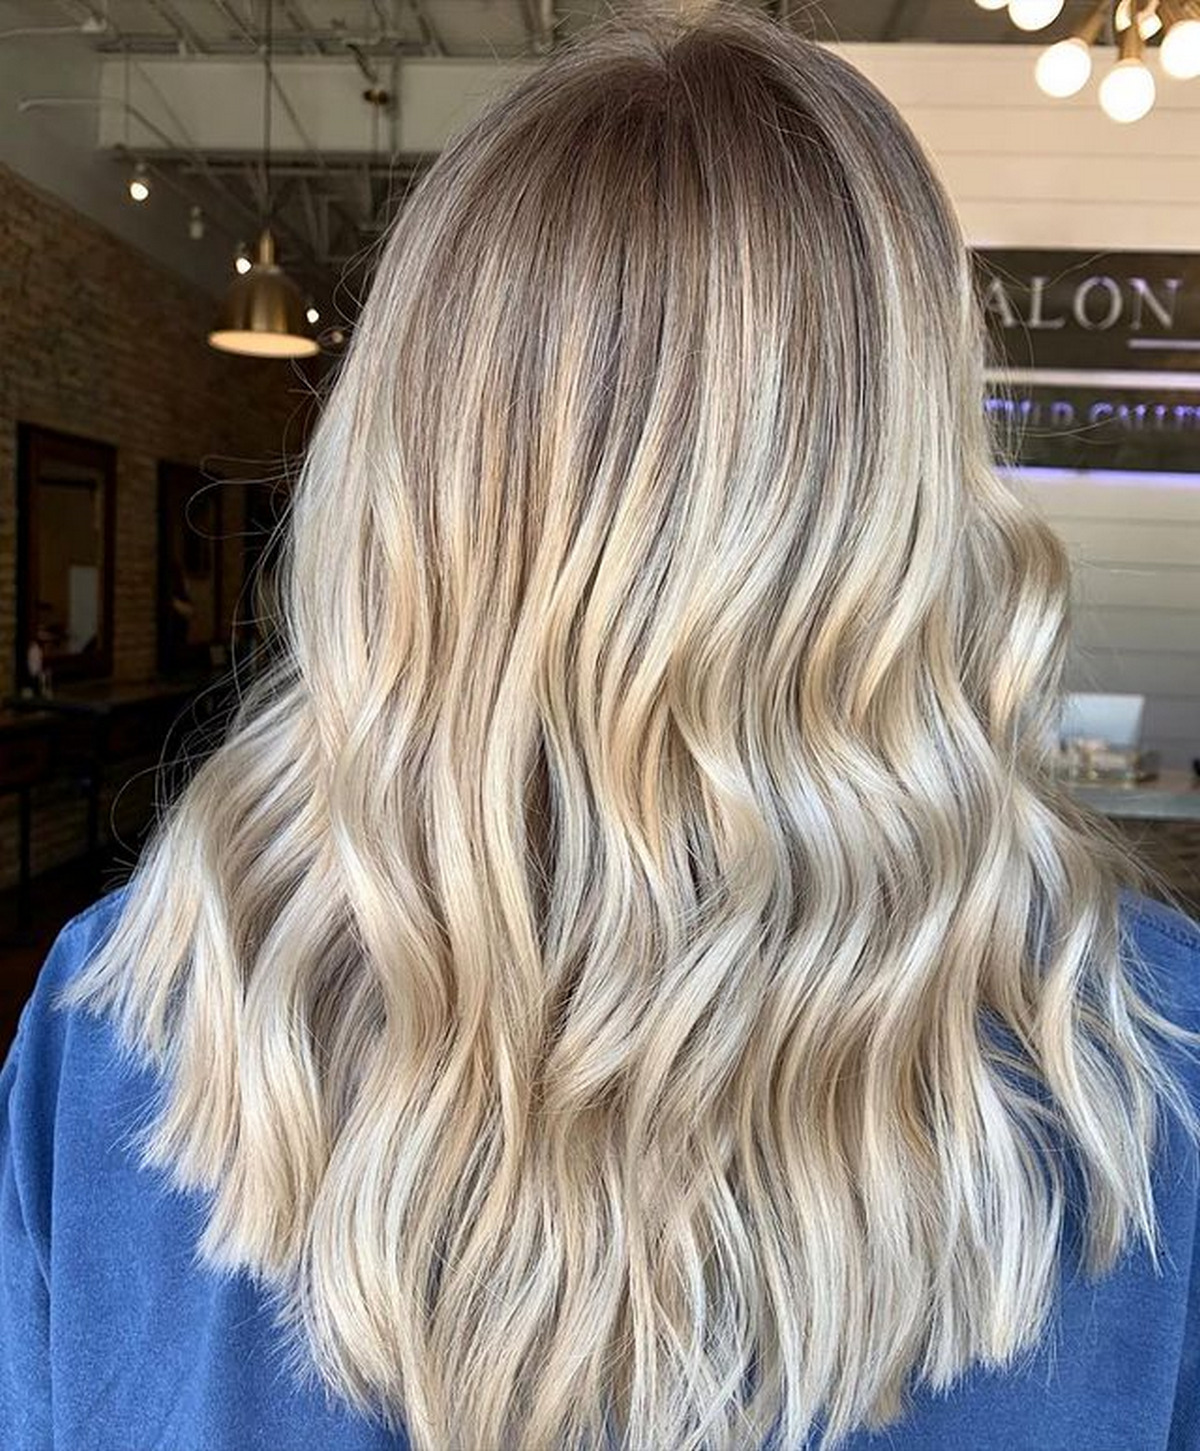 Shadow-Rooted Blonde For Medium-Length Hair